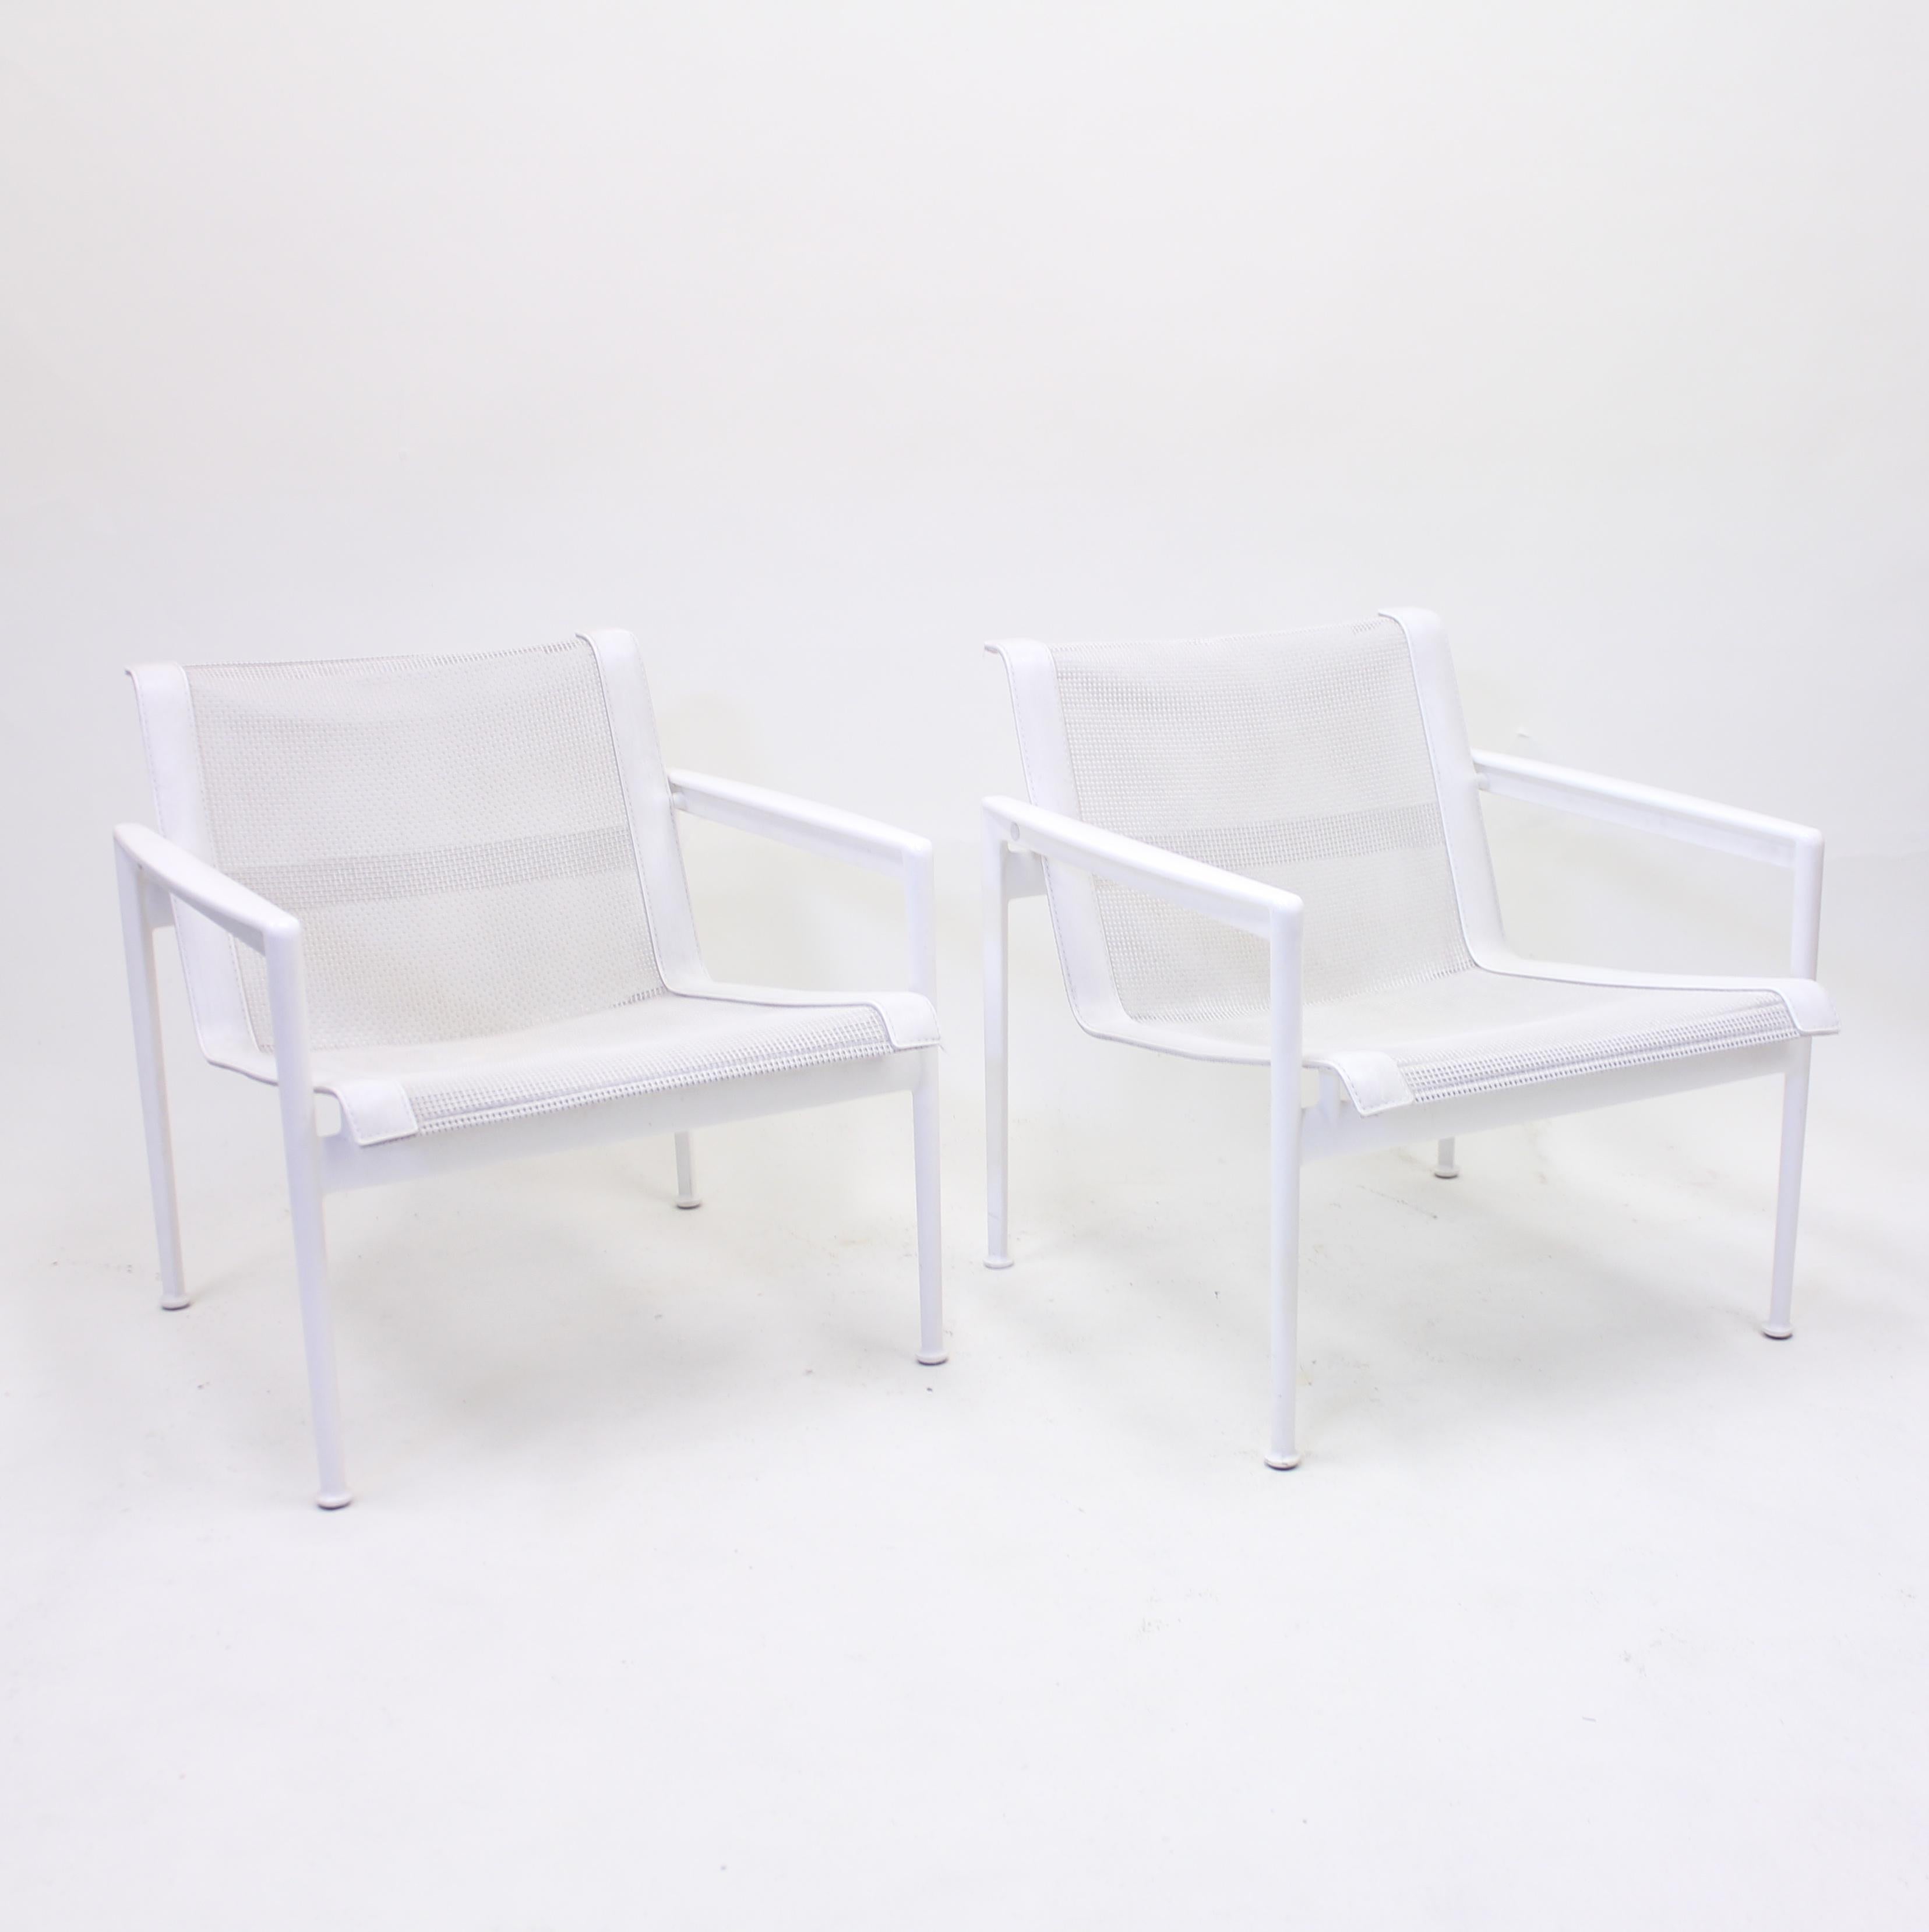 Pair of low outdoor/indoor armchairs, in white lacquered steel with leather and net seat and back, designed på Richard Schultz in 1966 and produced by B&B Italia. They are a part of the Schultz collection which contains several models in the same